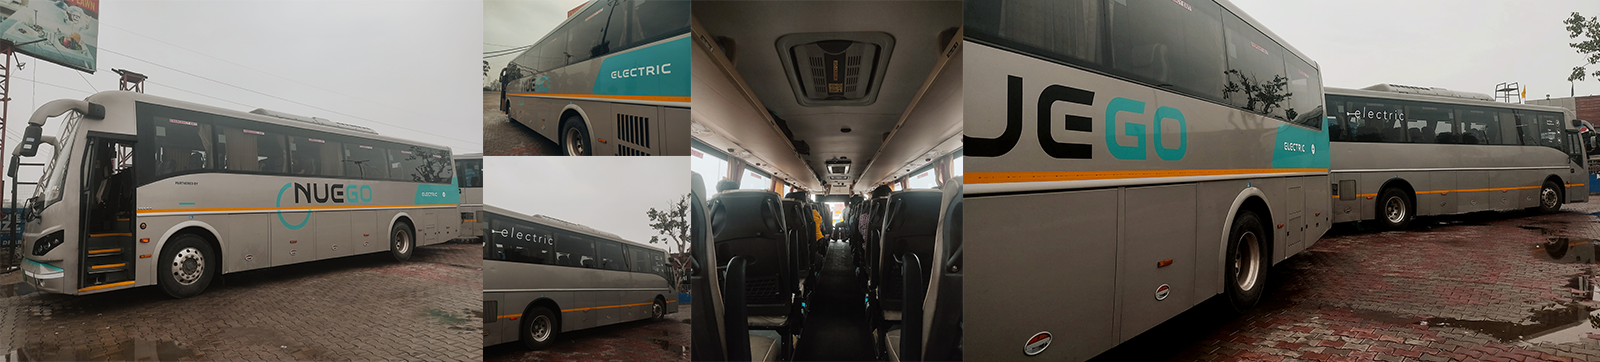 NUE GO Electric Buses Start Operations On Delhi-Chd Route